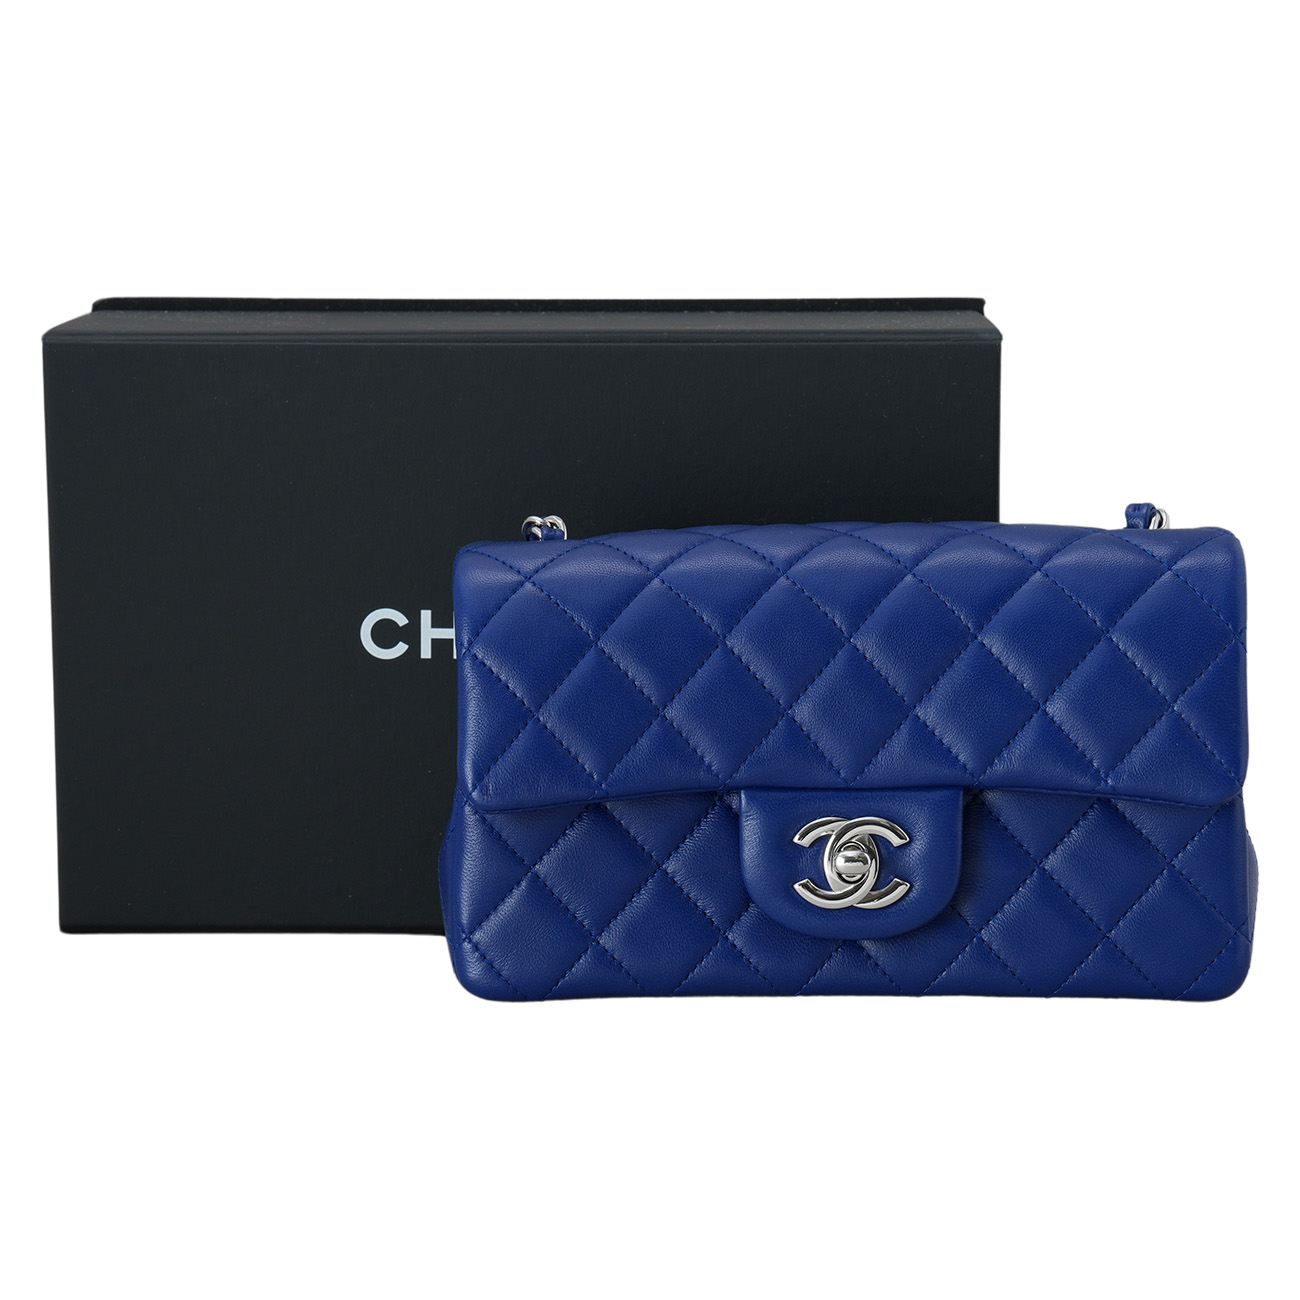 CHANEL(NEW)샤넬 A69900 램스킨 클래식 뉴미니 크로스백 (새상품) NEW PRODUCT